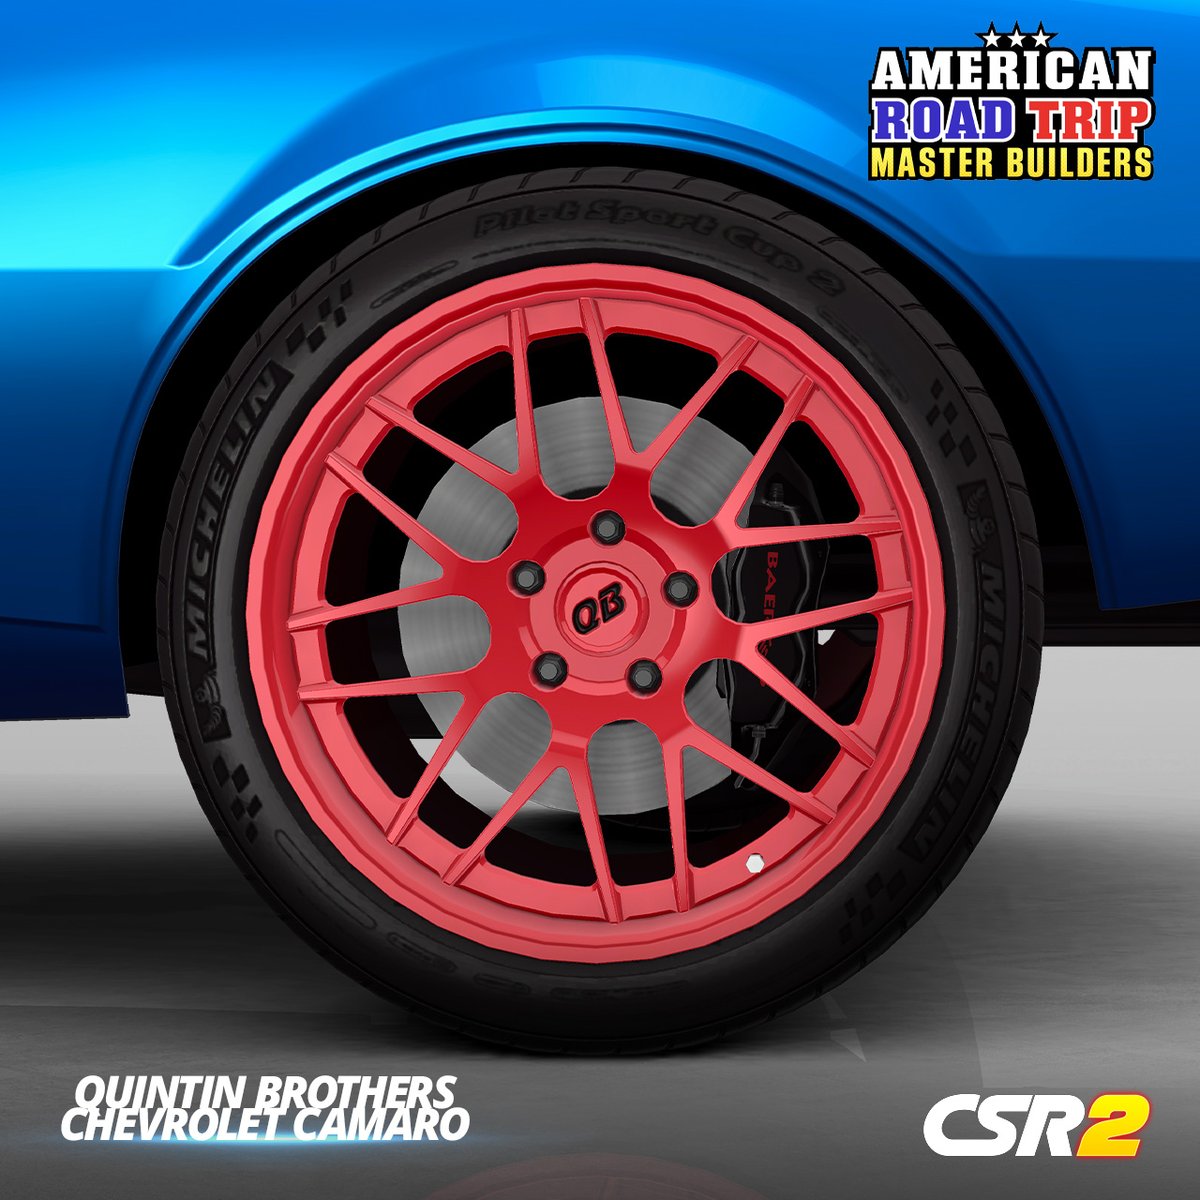 Have you collected your free car yet? 🚗

Play the American Road Trip 3: Boston today and collect the Quintin Brothers Chevrolet Camaro today!

zynga.social/csr2tw
 
#ART3 #AmericanRoadTrip #QuintinBrothers #Chevrolet #Camaro